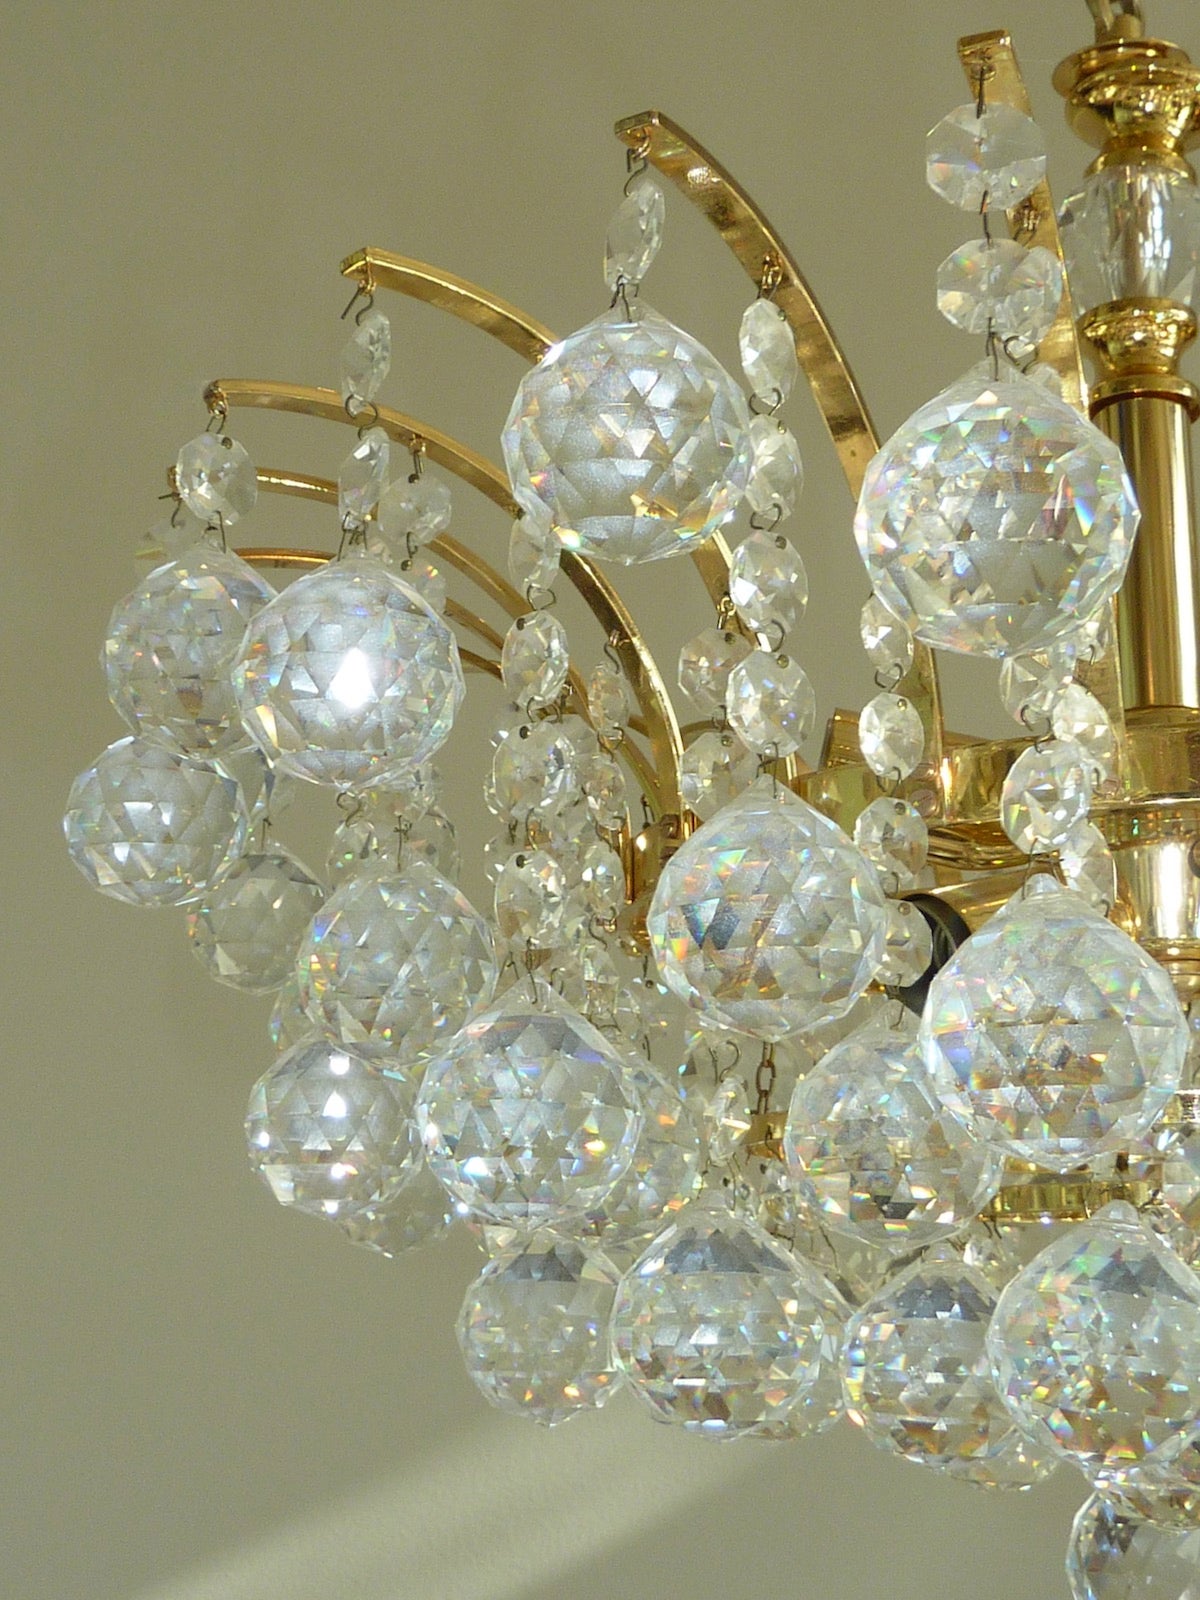 Details about   Vintage Antique Cut Crystal Ball For Chandelier 